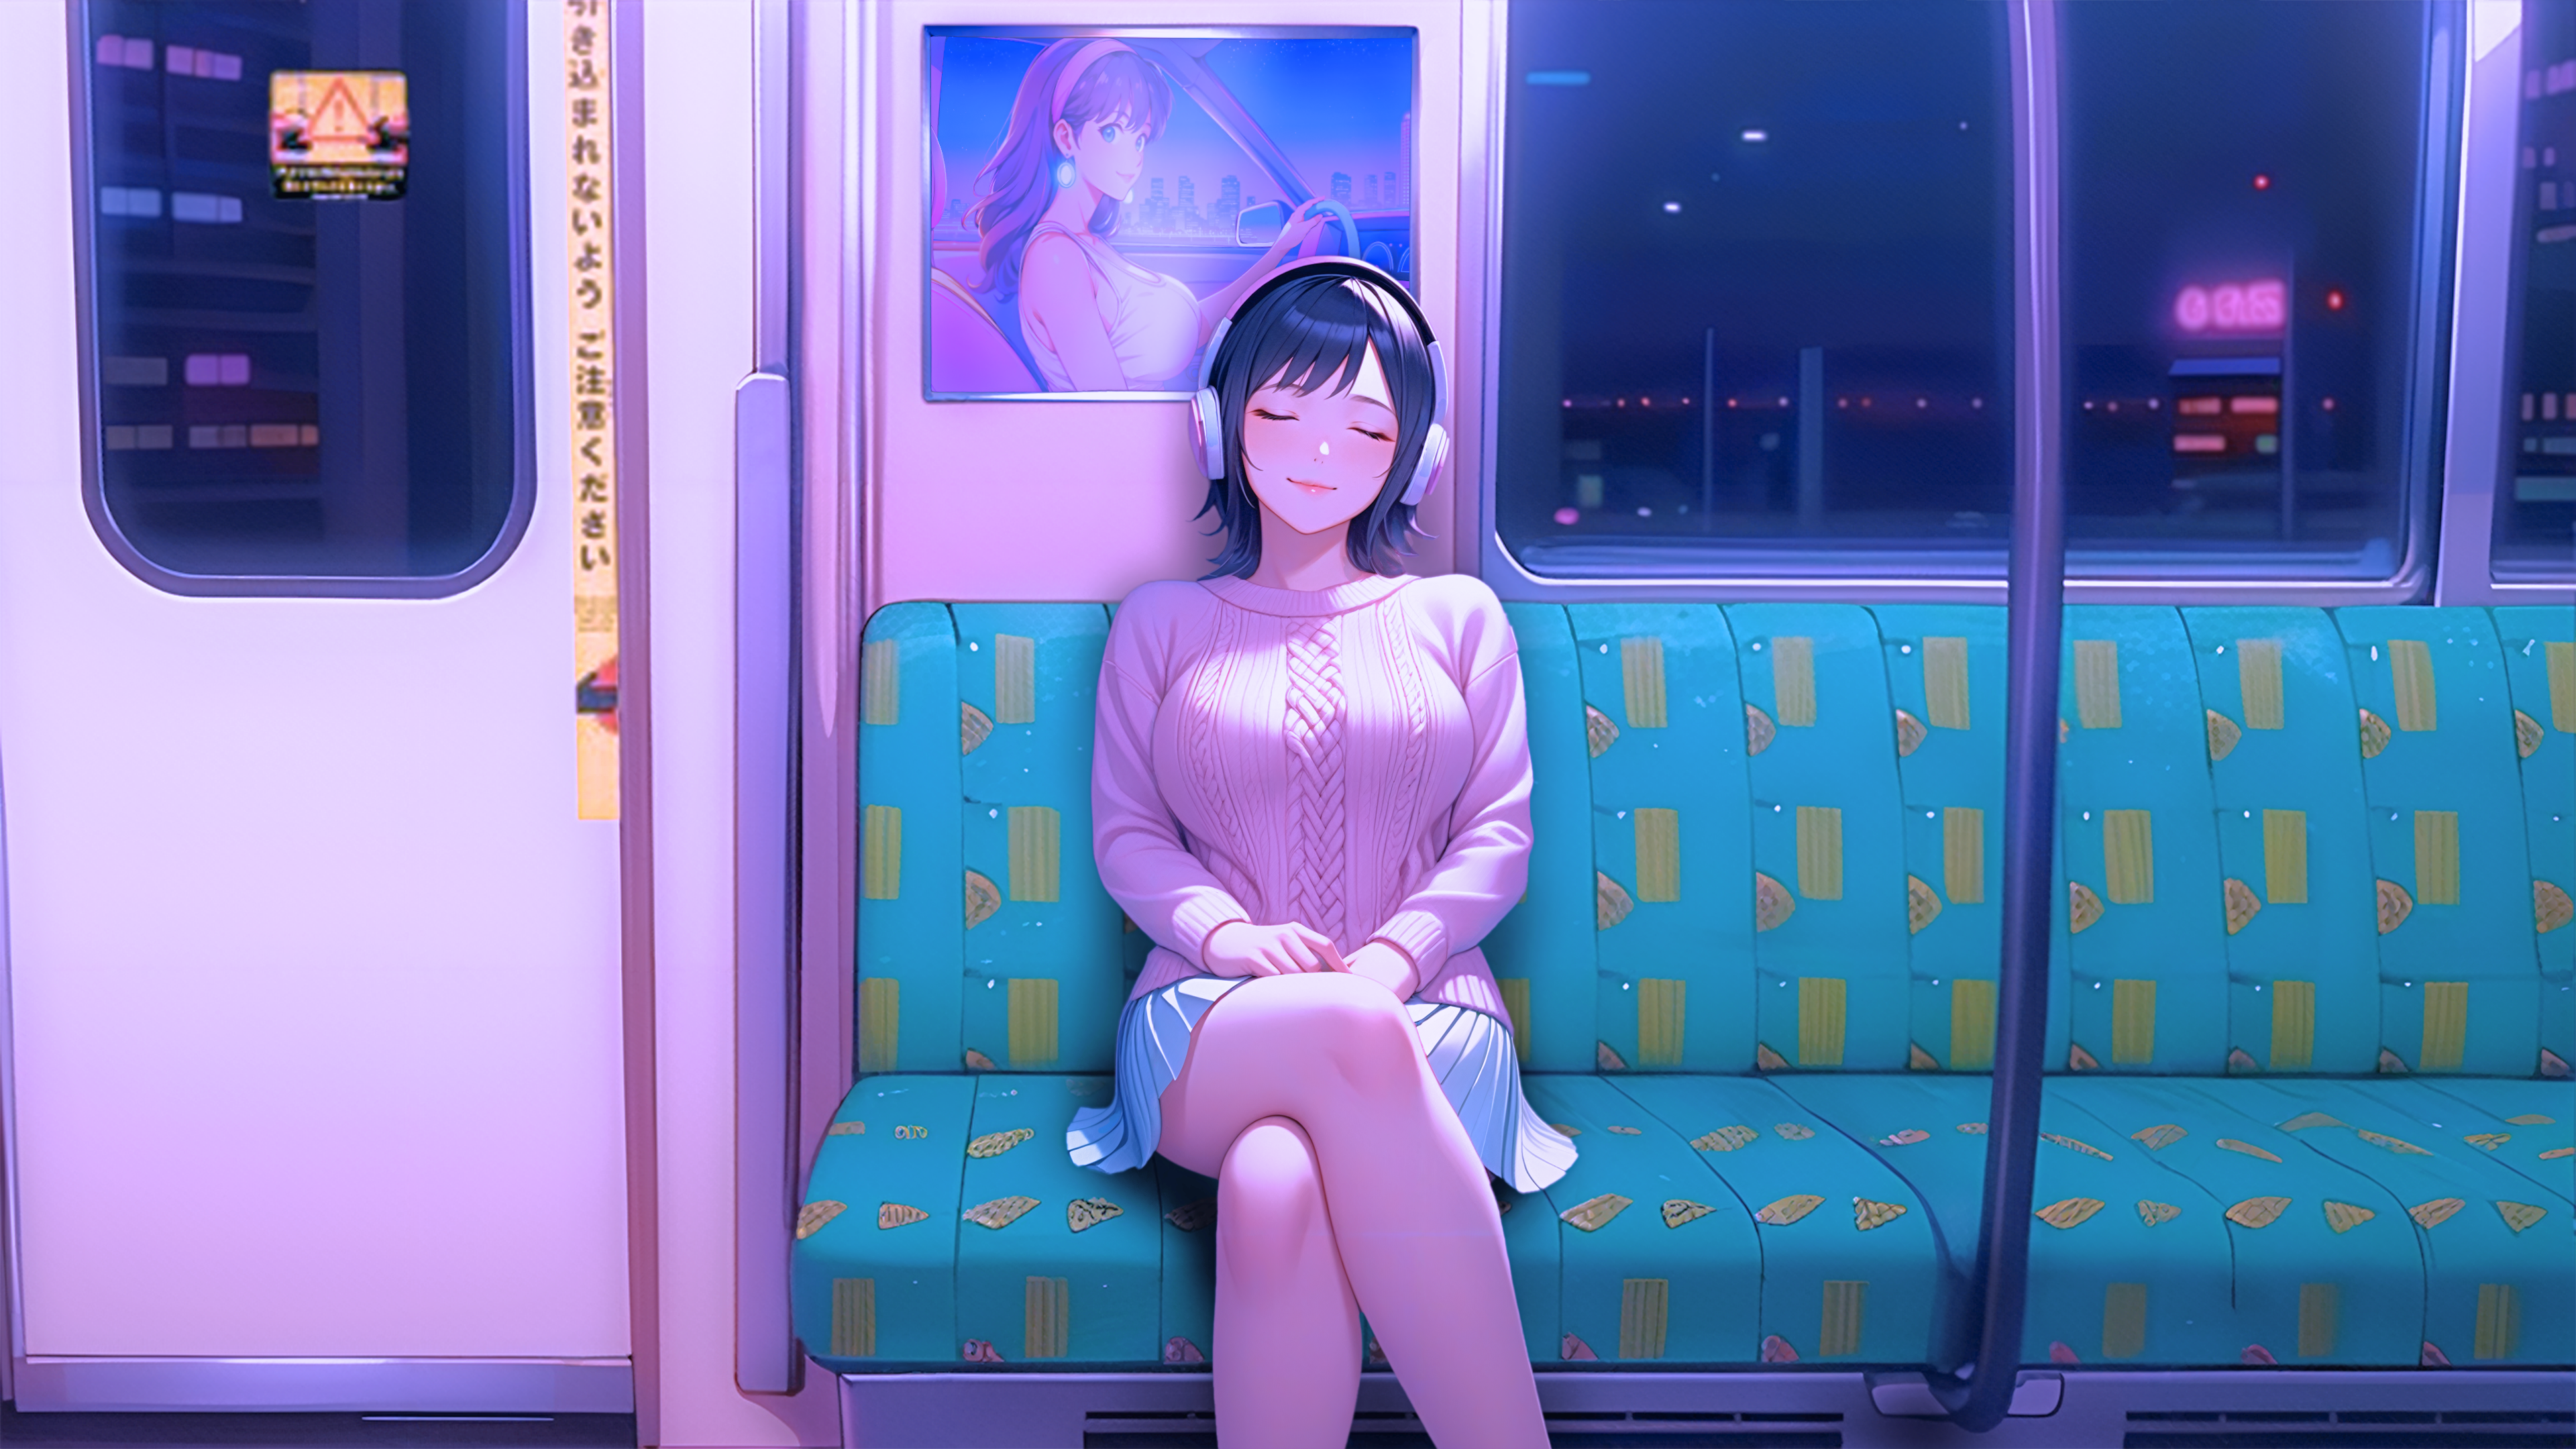 Anime 3840x2160 AI art anime girls subway neon headphones blue skirt legs crossed closed eyes vehicle interiors smiling pink sweater relaxing closed mouth short hair Japanese sweater sitting